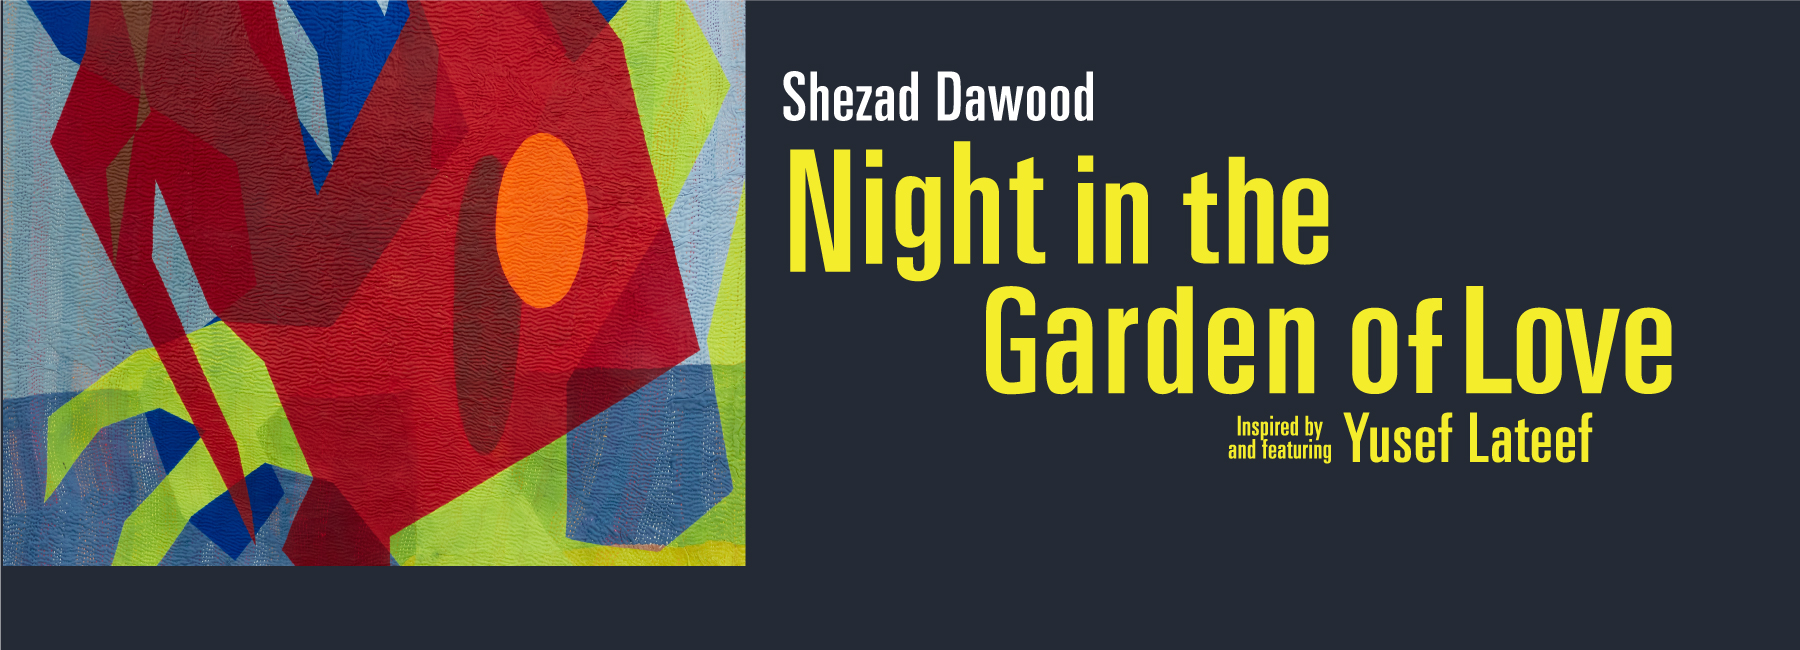 Shezad Dawood’s multisensory exhibition at the Aga Khan Museum in Toronto